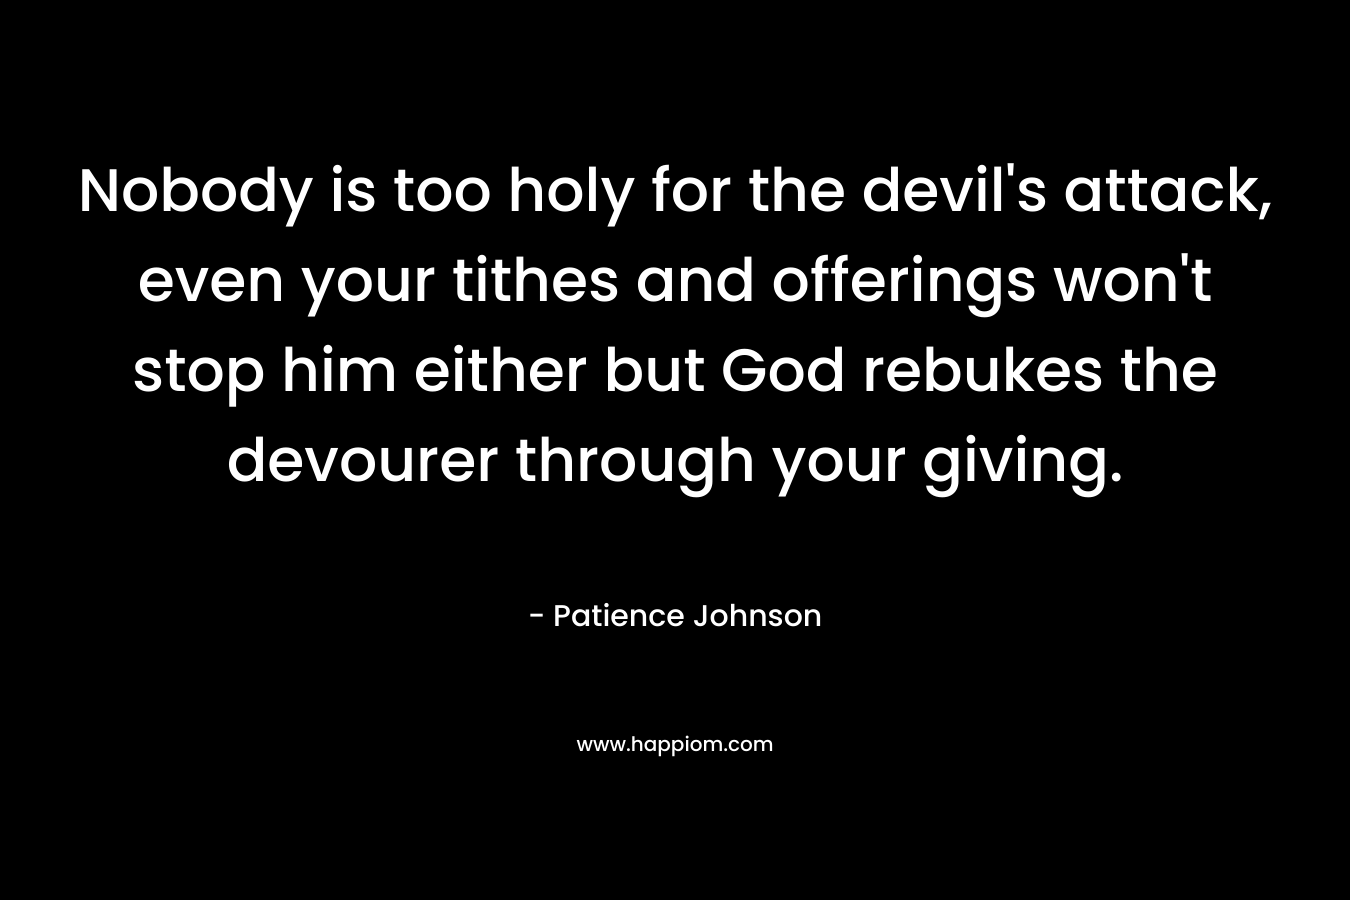 Nobody is too holy for the devil's attack, even your tithes and offerings won't stop him either but God rebukes the devourer through your giving.